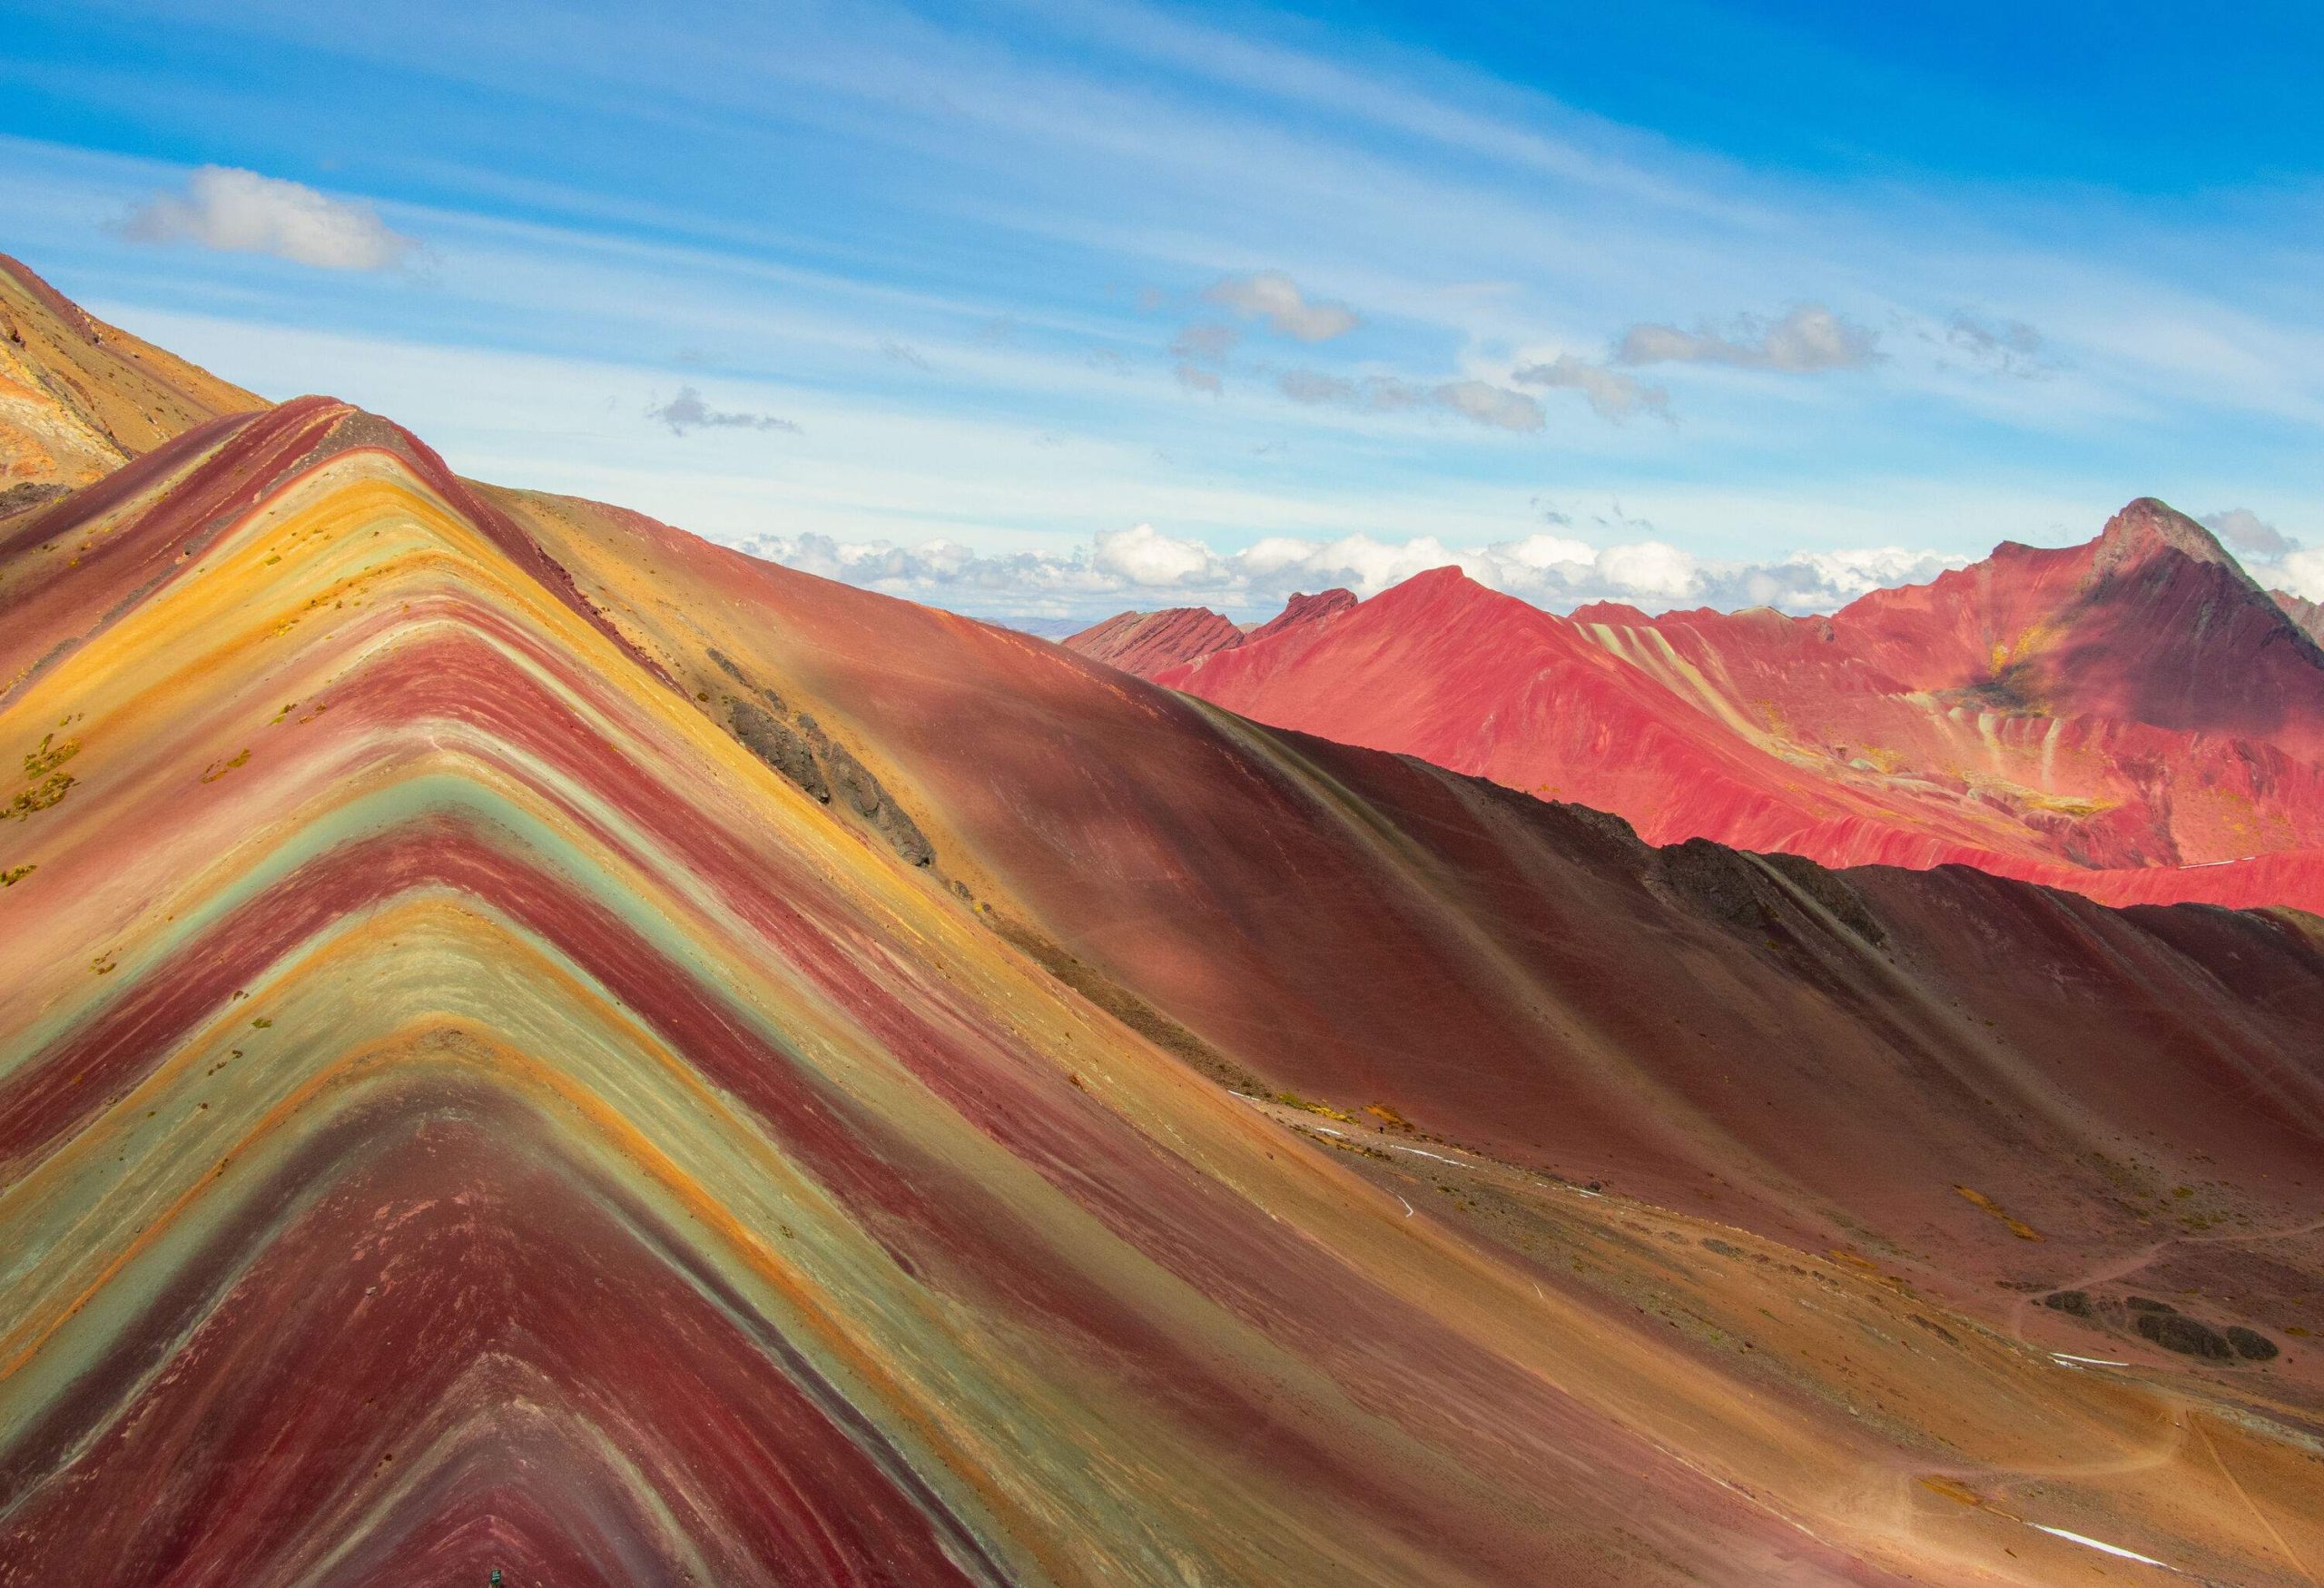 The spectacular Rainbow Mountain of Peru with its multicoloured mineral-filled layers.